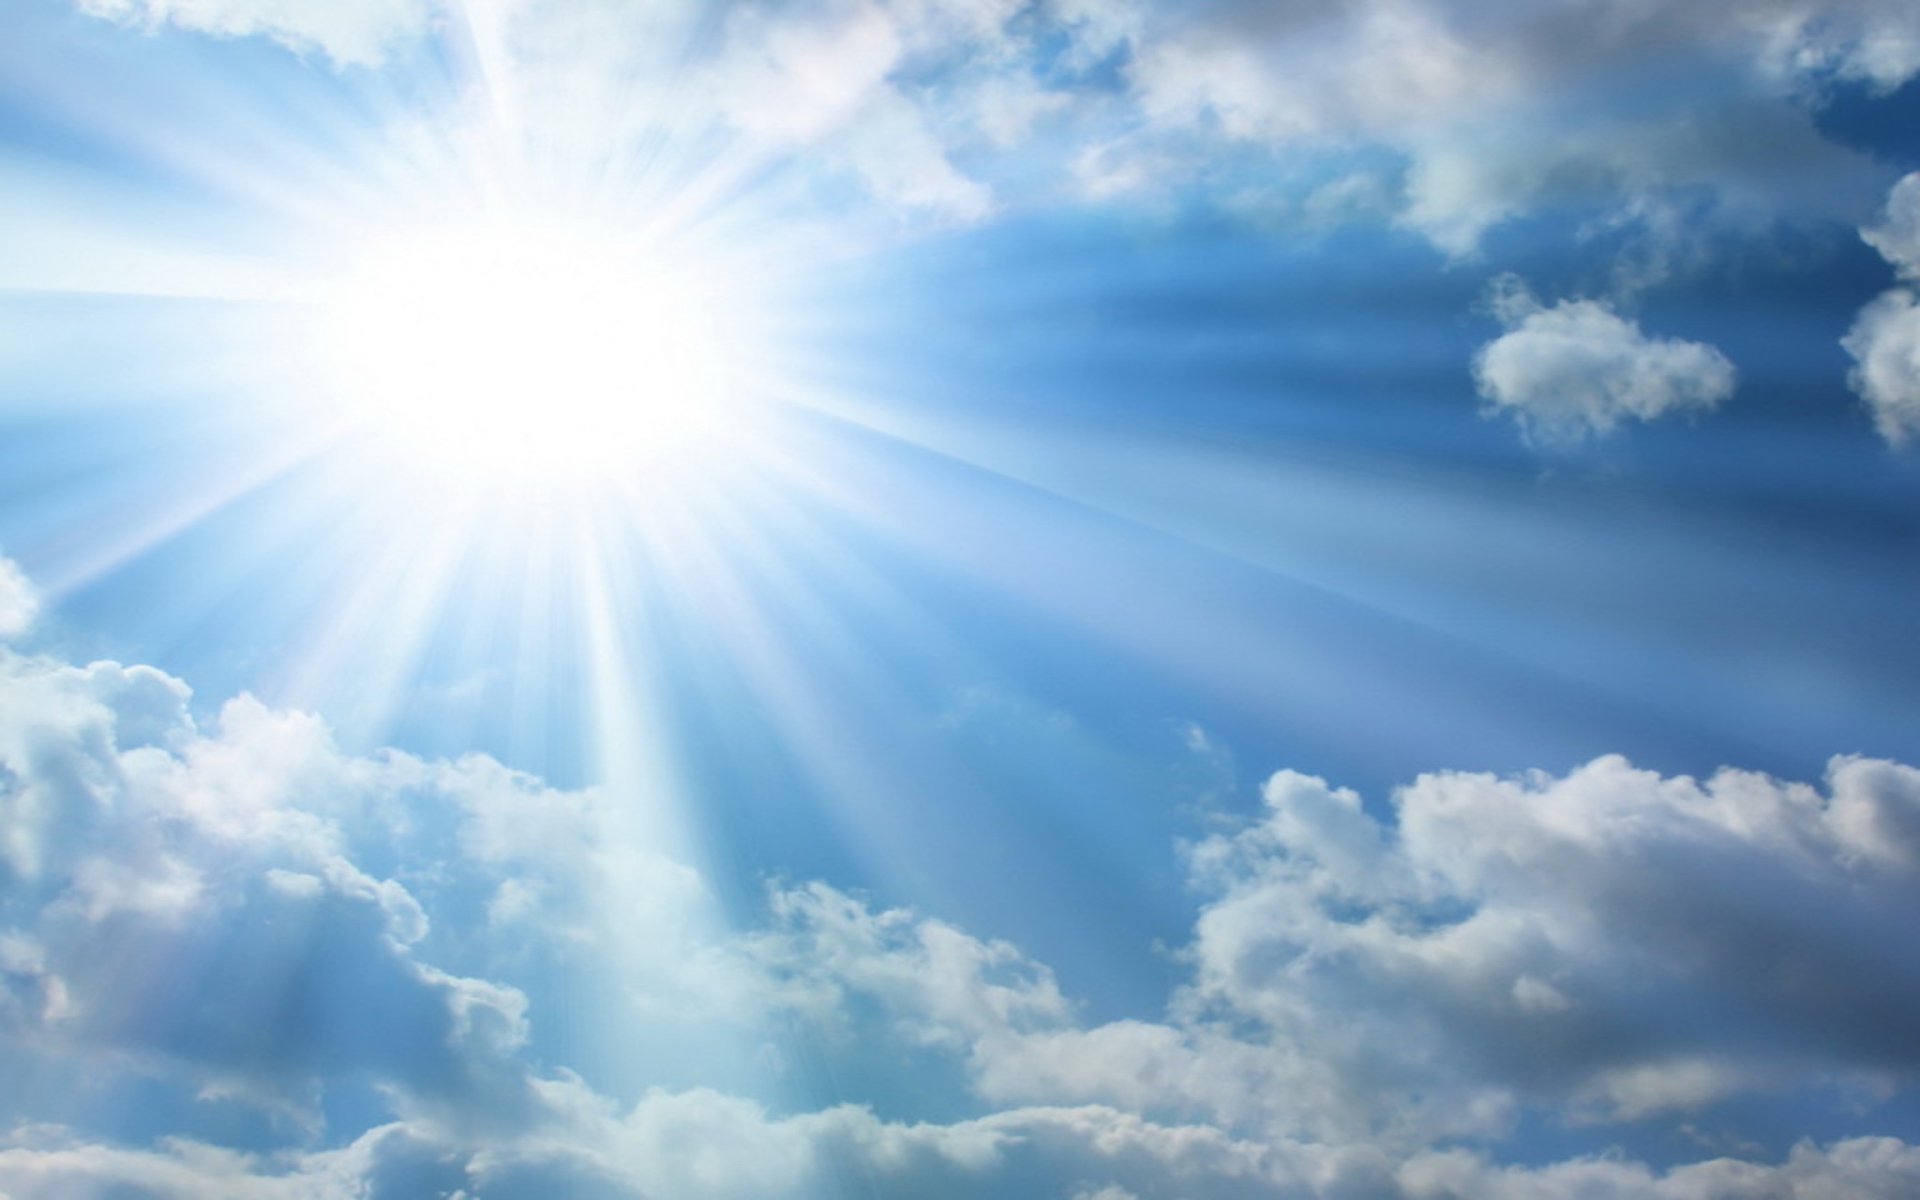 10 Amazing Health Benefits of Sunlight (Other than Vitamin D